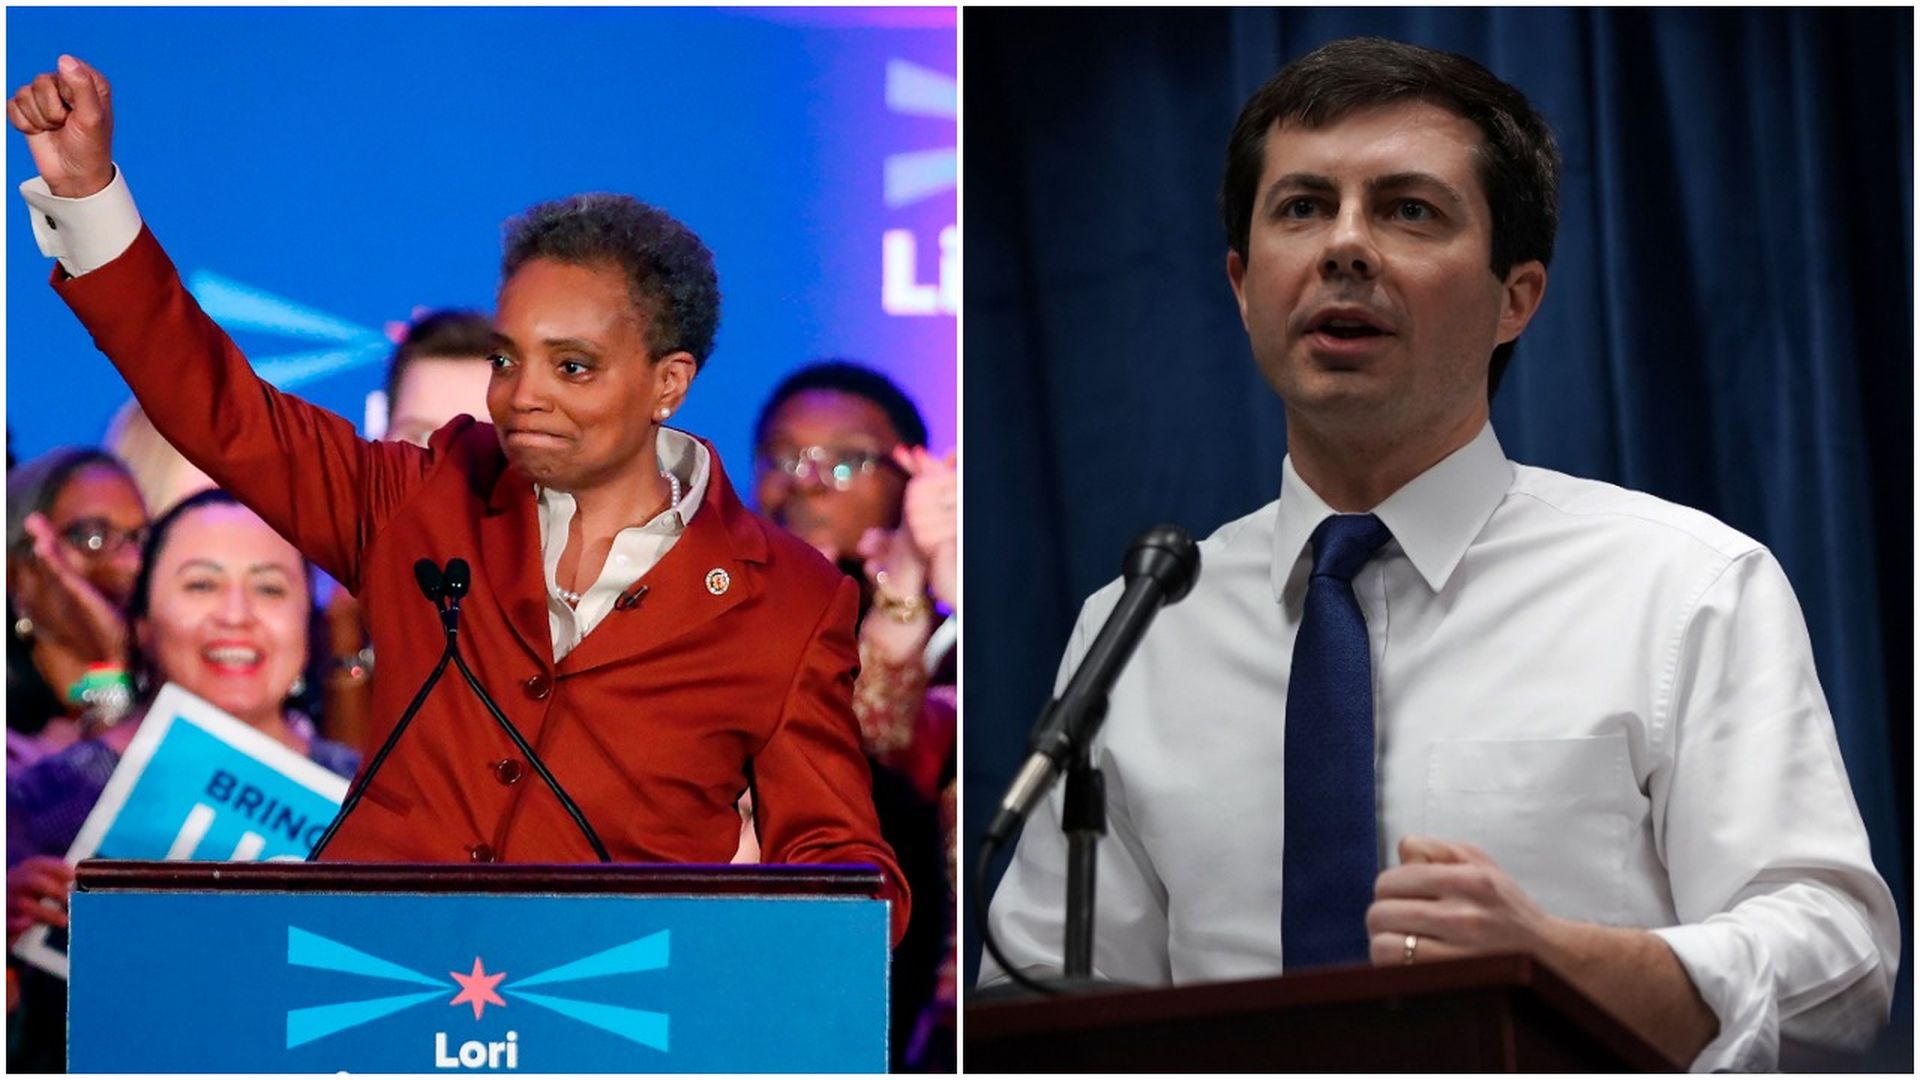 This is a splitscreen image. On the left, Lori Lightfoot raises a fist in victory behind a podium. On the right, pete buttigieg speaks into a micrphone. 